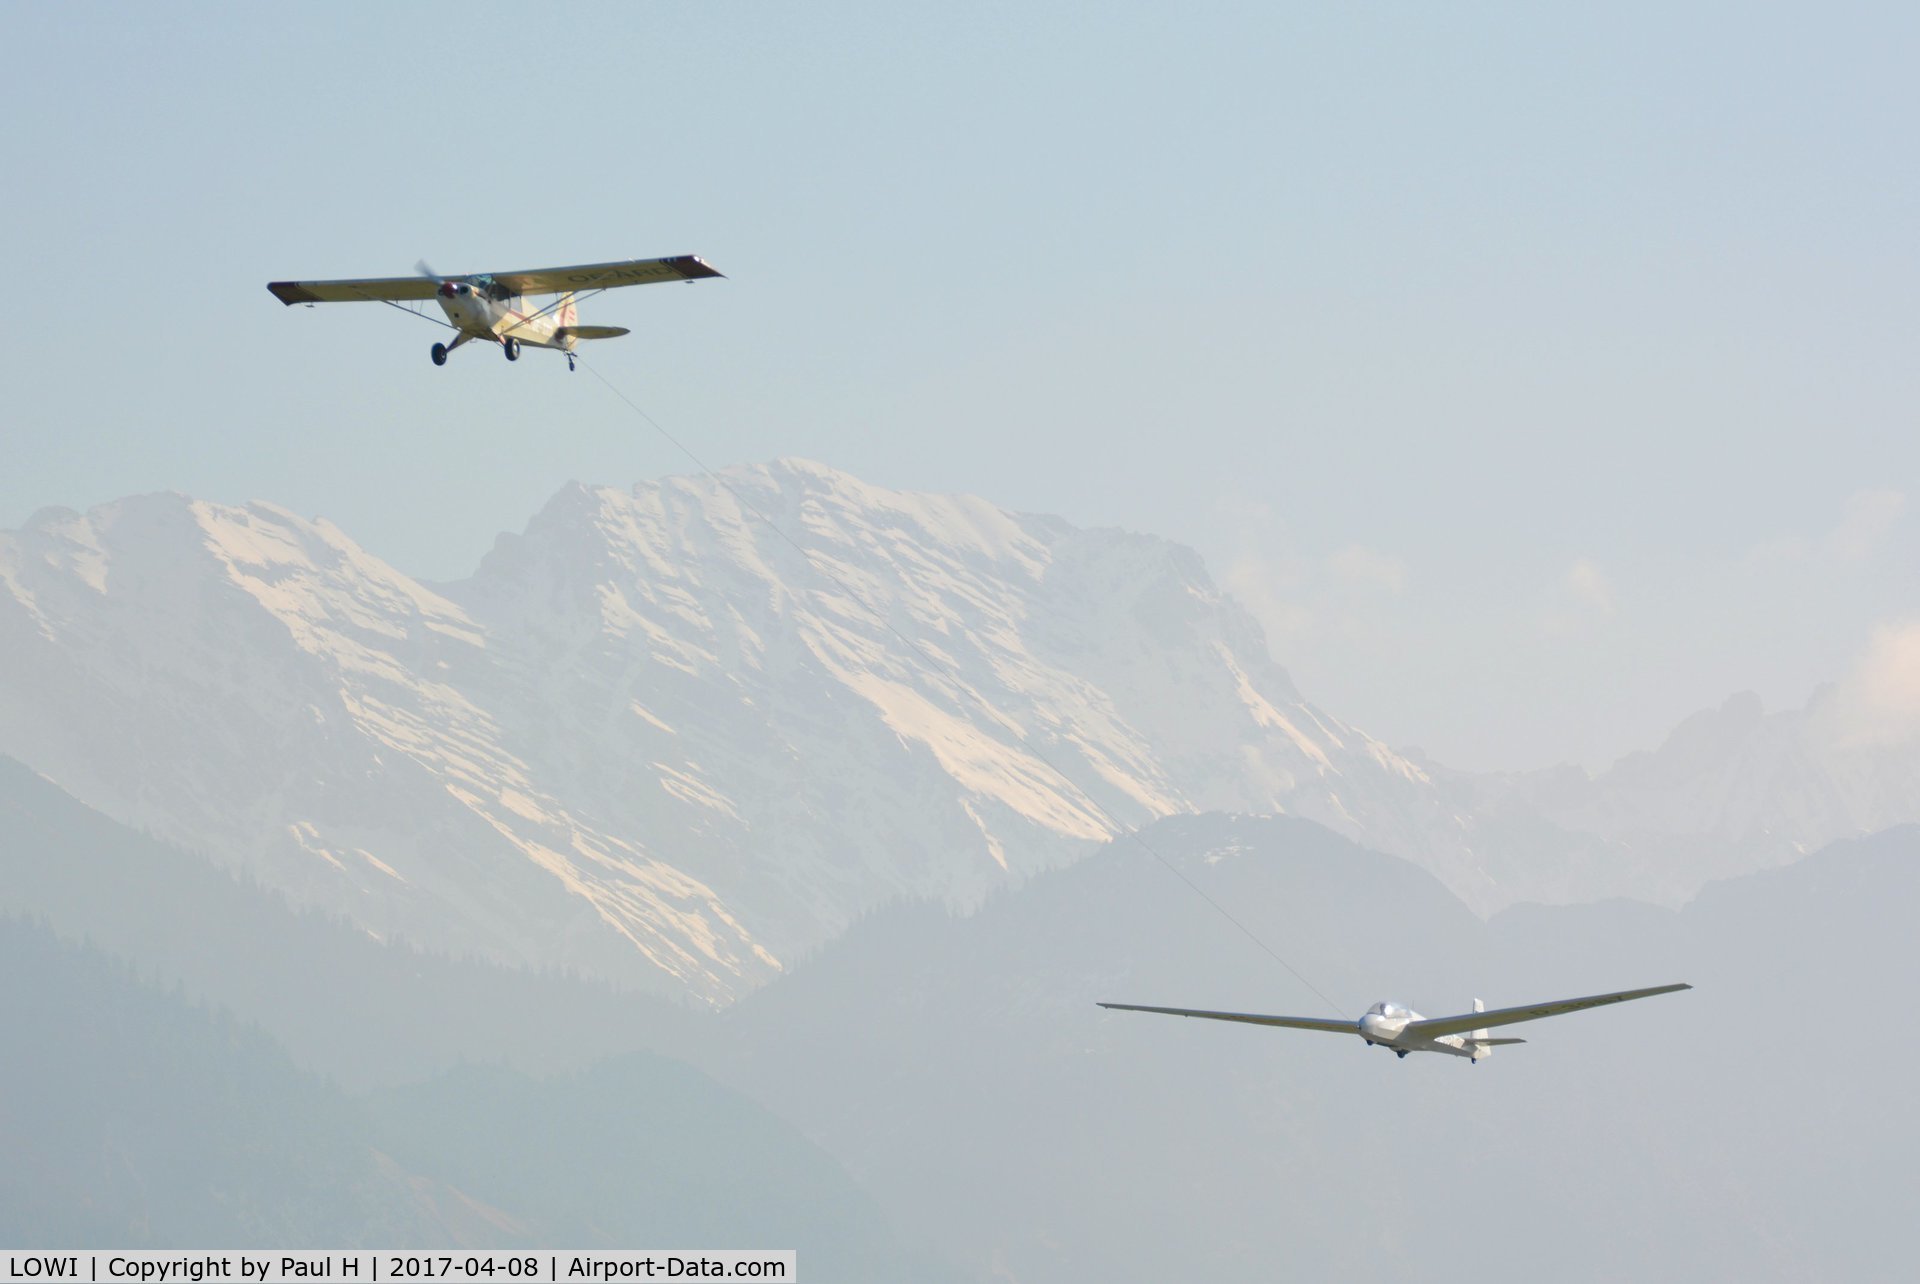 Innsbruck Airport, Innsbruck Austria (LOWI) - Towing a glider out off LOWI, Innsbruck with the austrian alps in the background